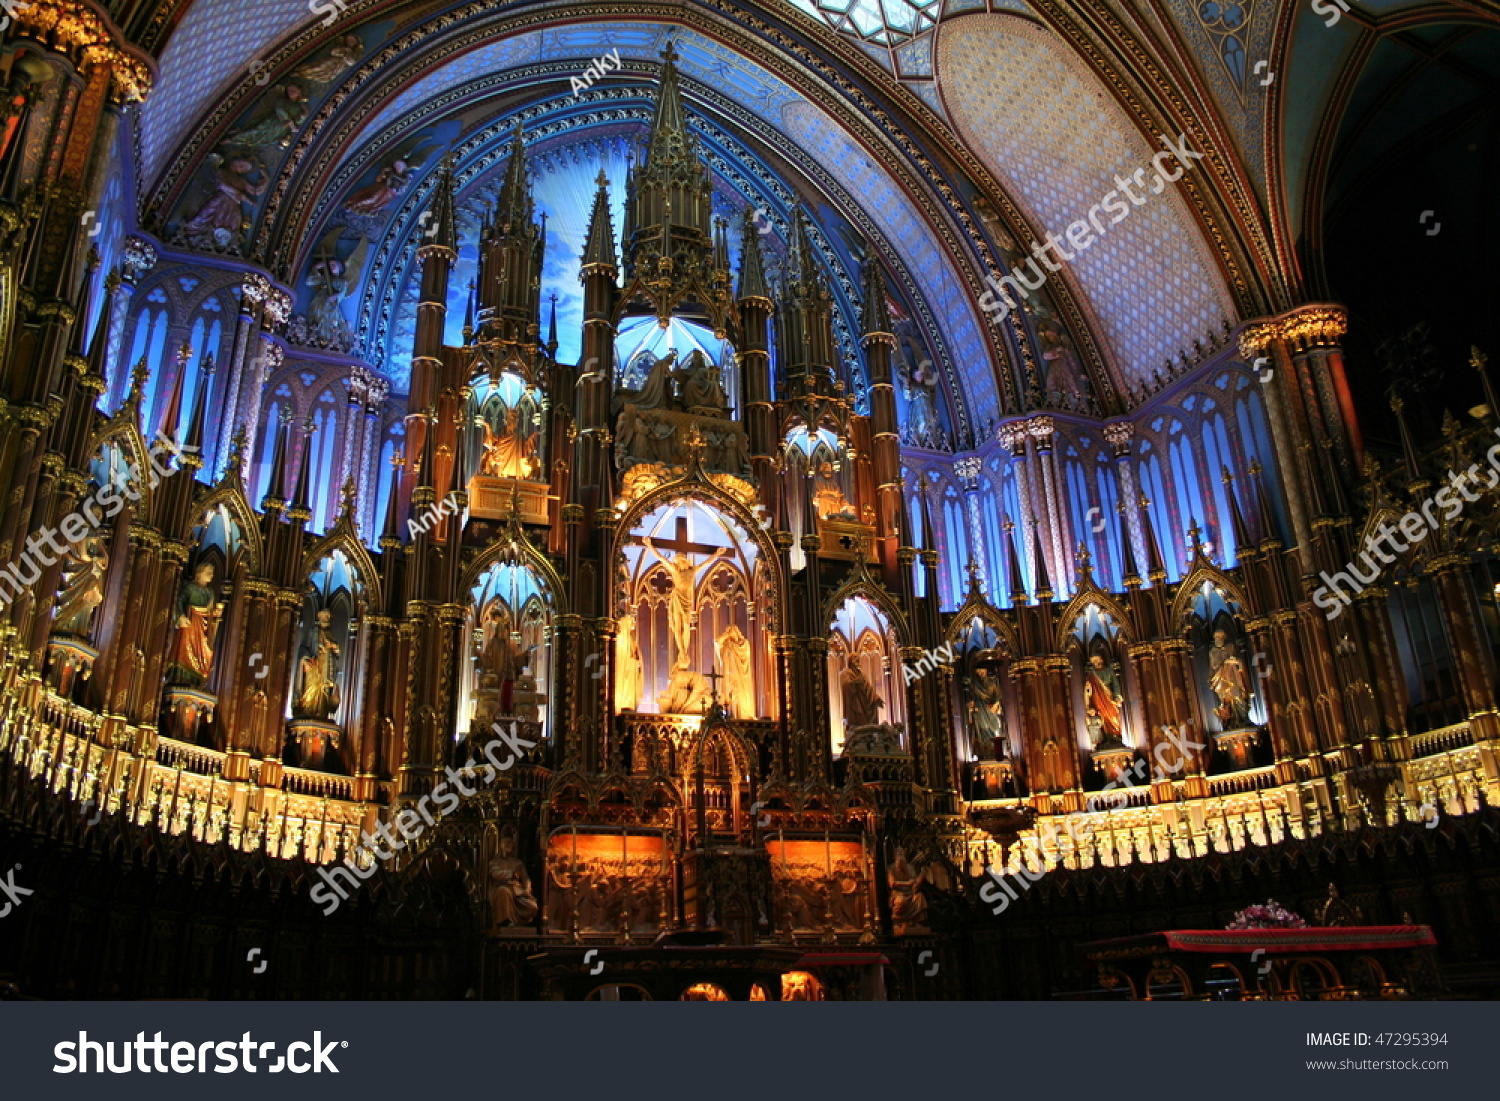 Interior of the Notre-Dame Basilica (Basilique Notre-Dame) in Montreal, Canada with deep blue ceiling with golden stars and sanctuary in polychrome of blues, azures, reds, purples, silver, and gold #47295394